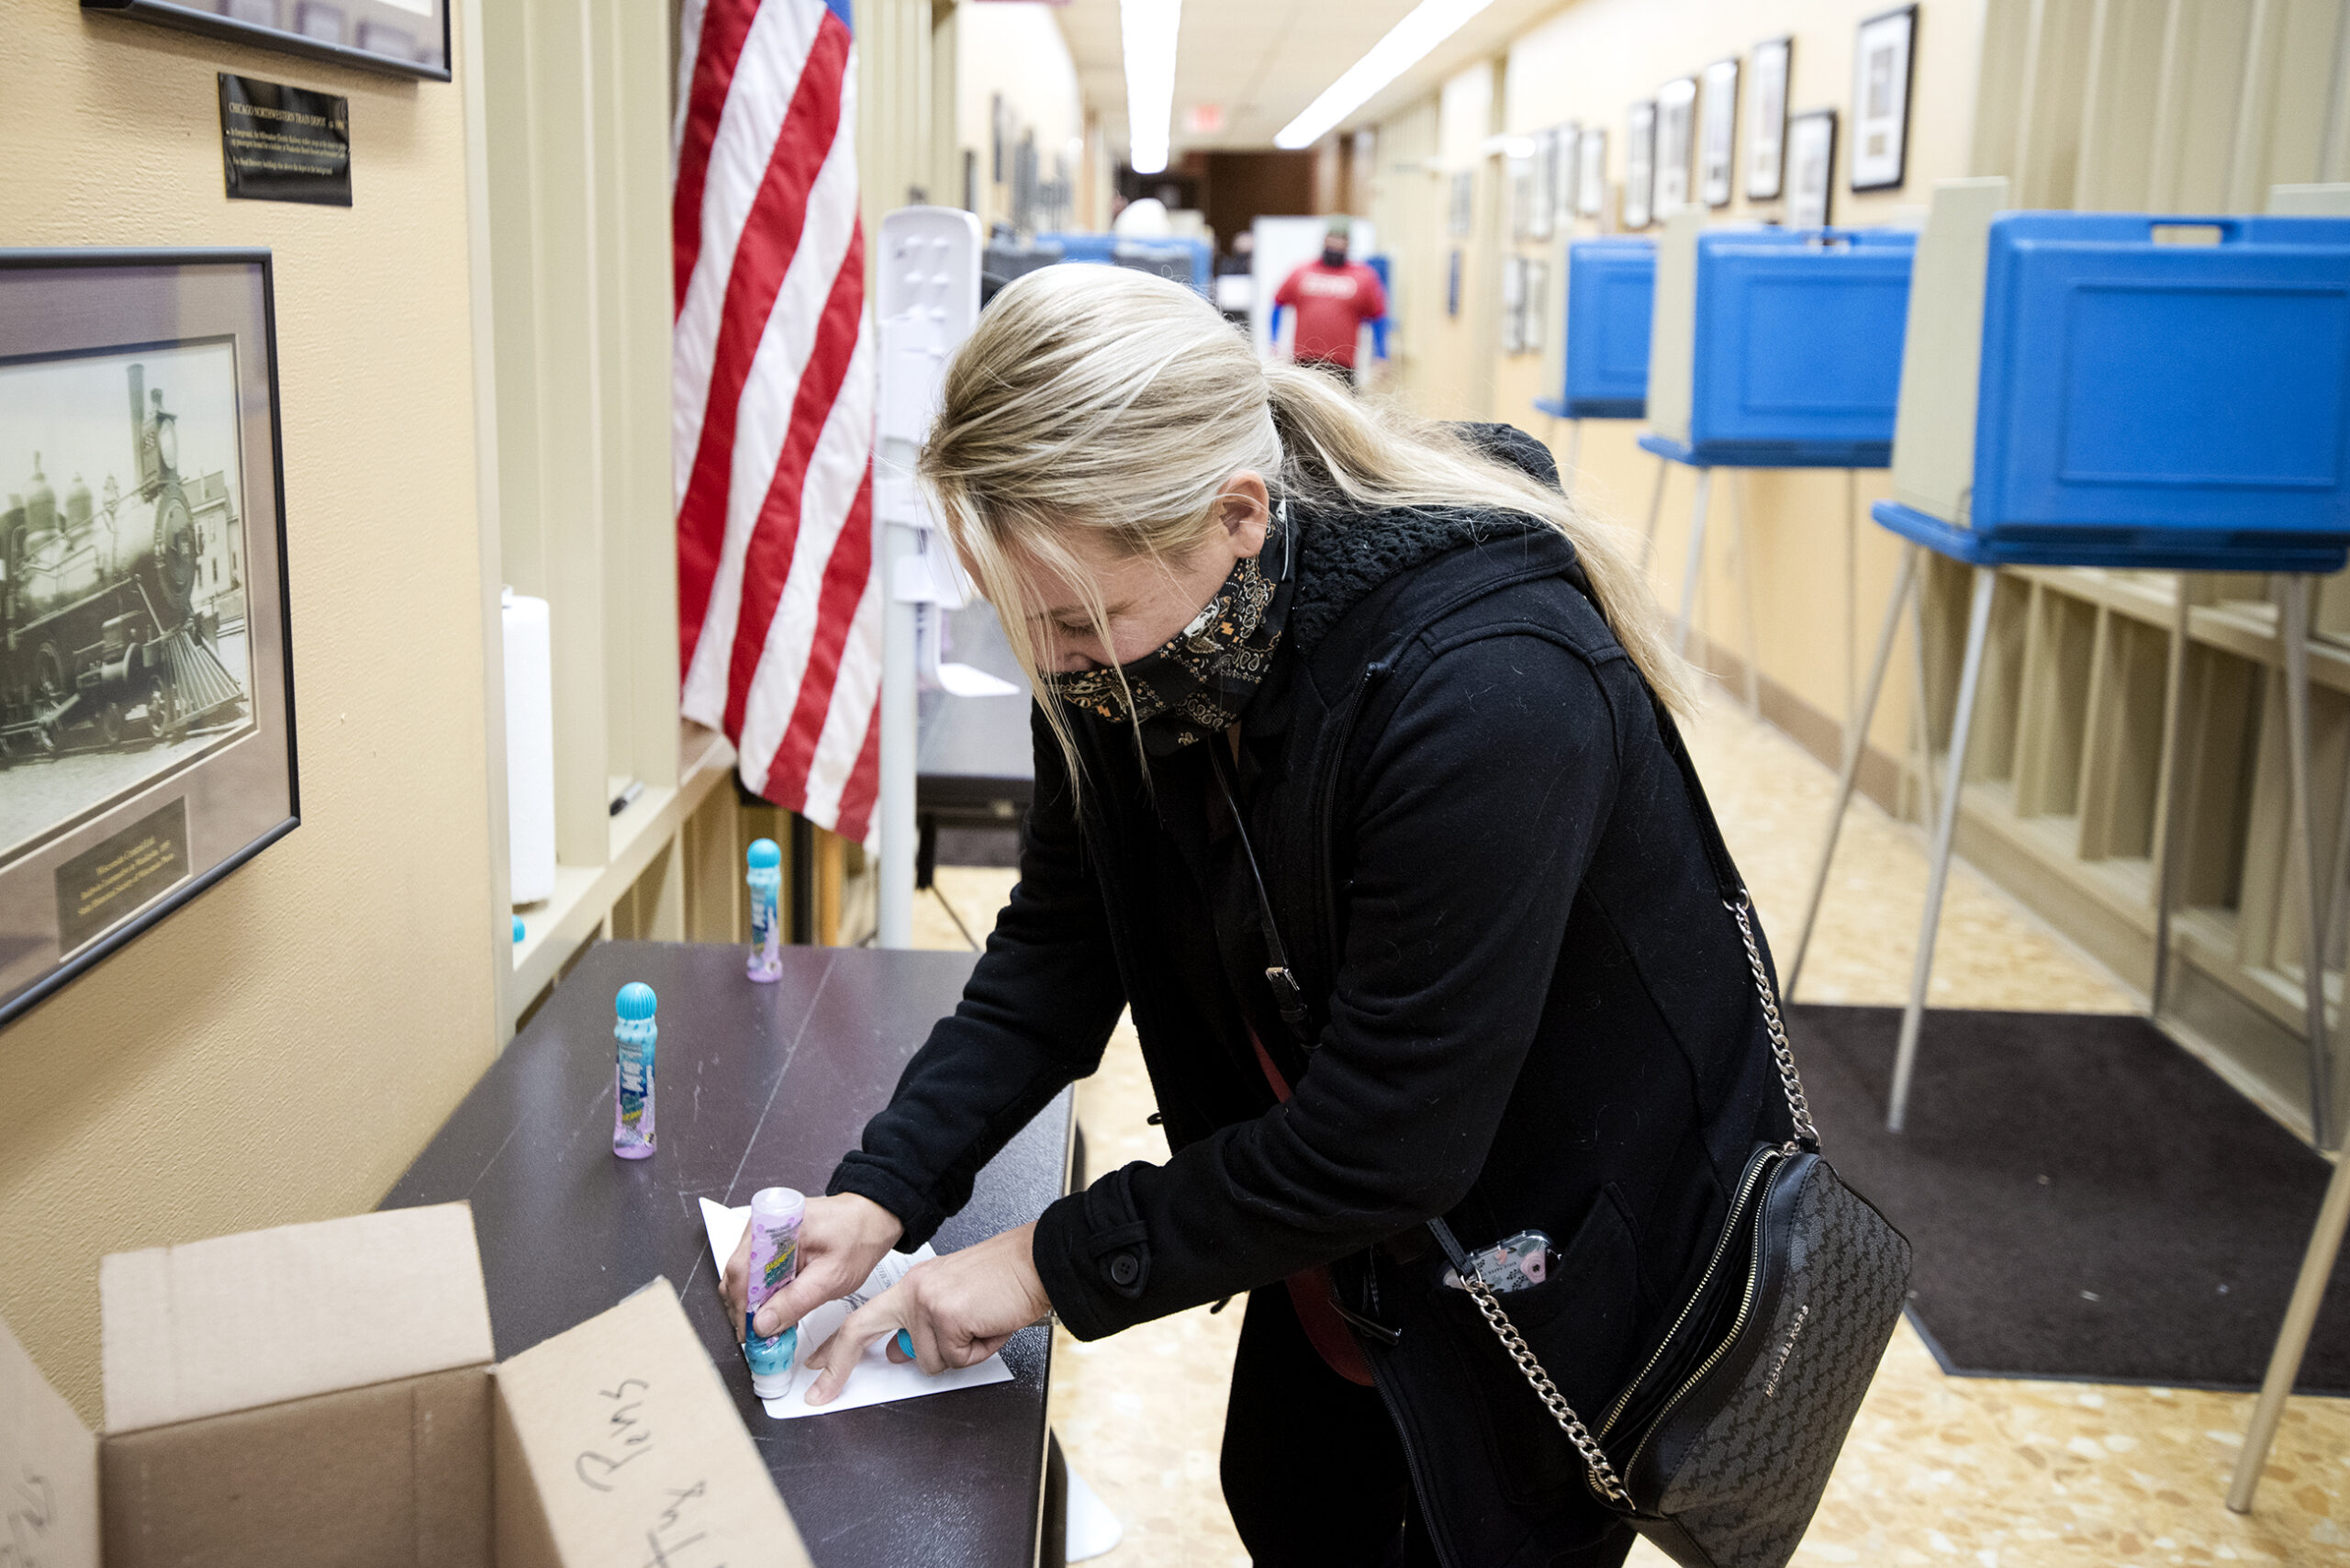 A woman uses glue to seal her ballot in an envelope. Voting booths can be seen in the background.